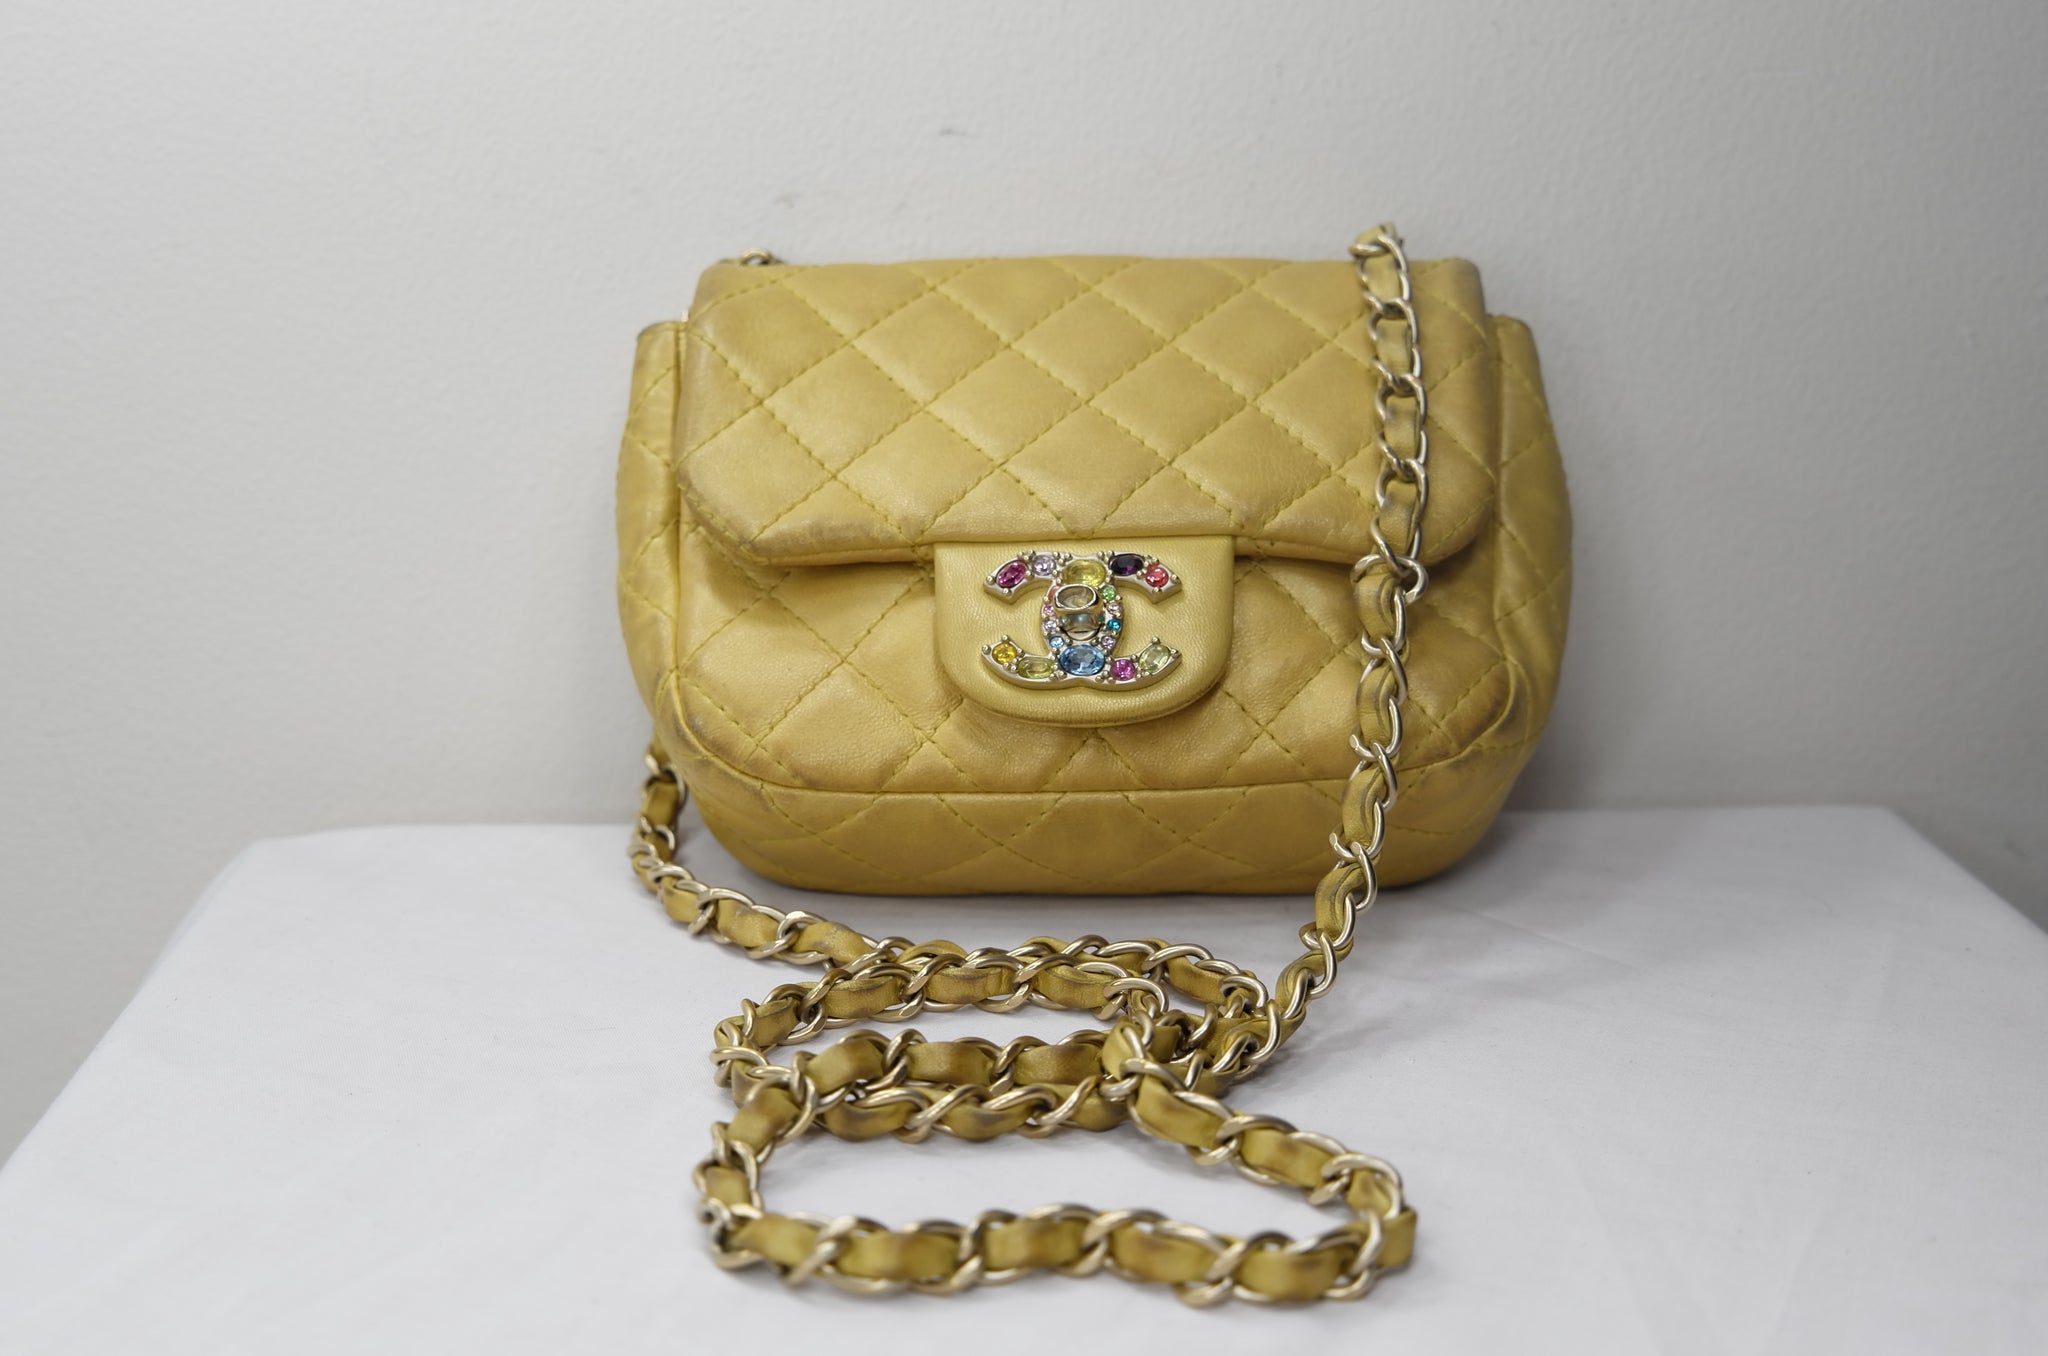 CHANEL SMALL CLASSIC FLAP HANDBAG, with quilted pink leather with